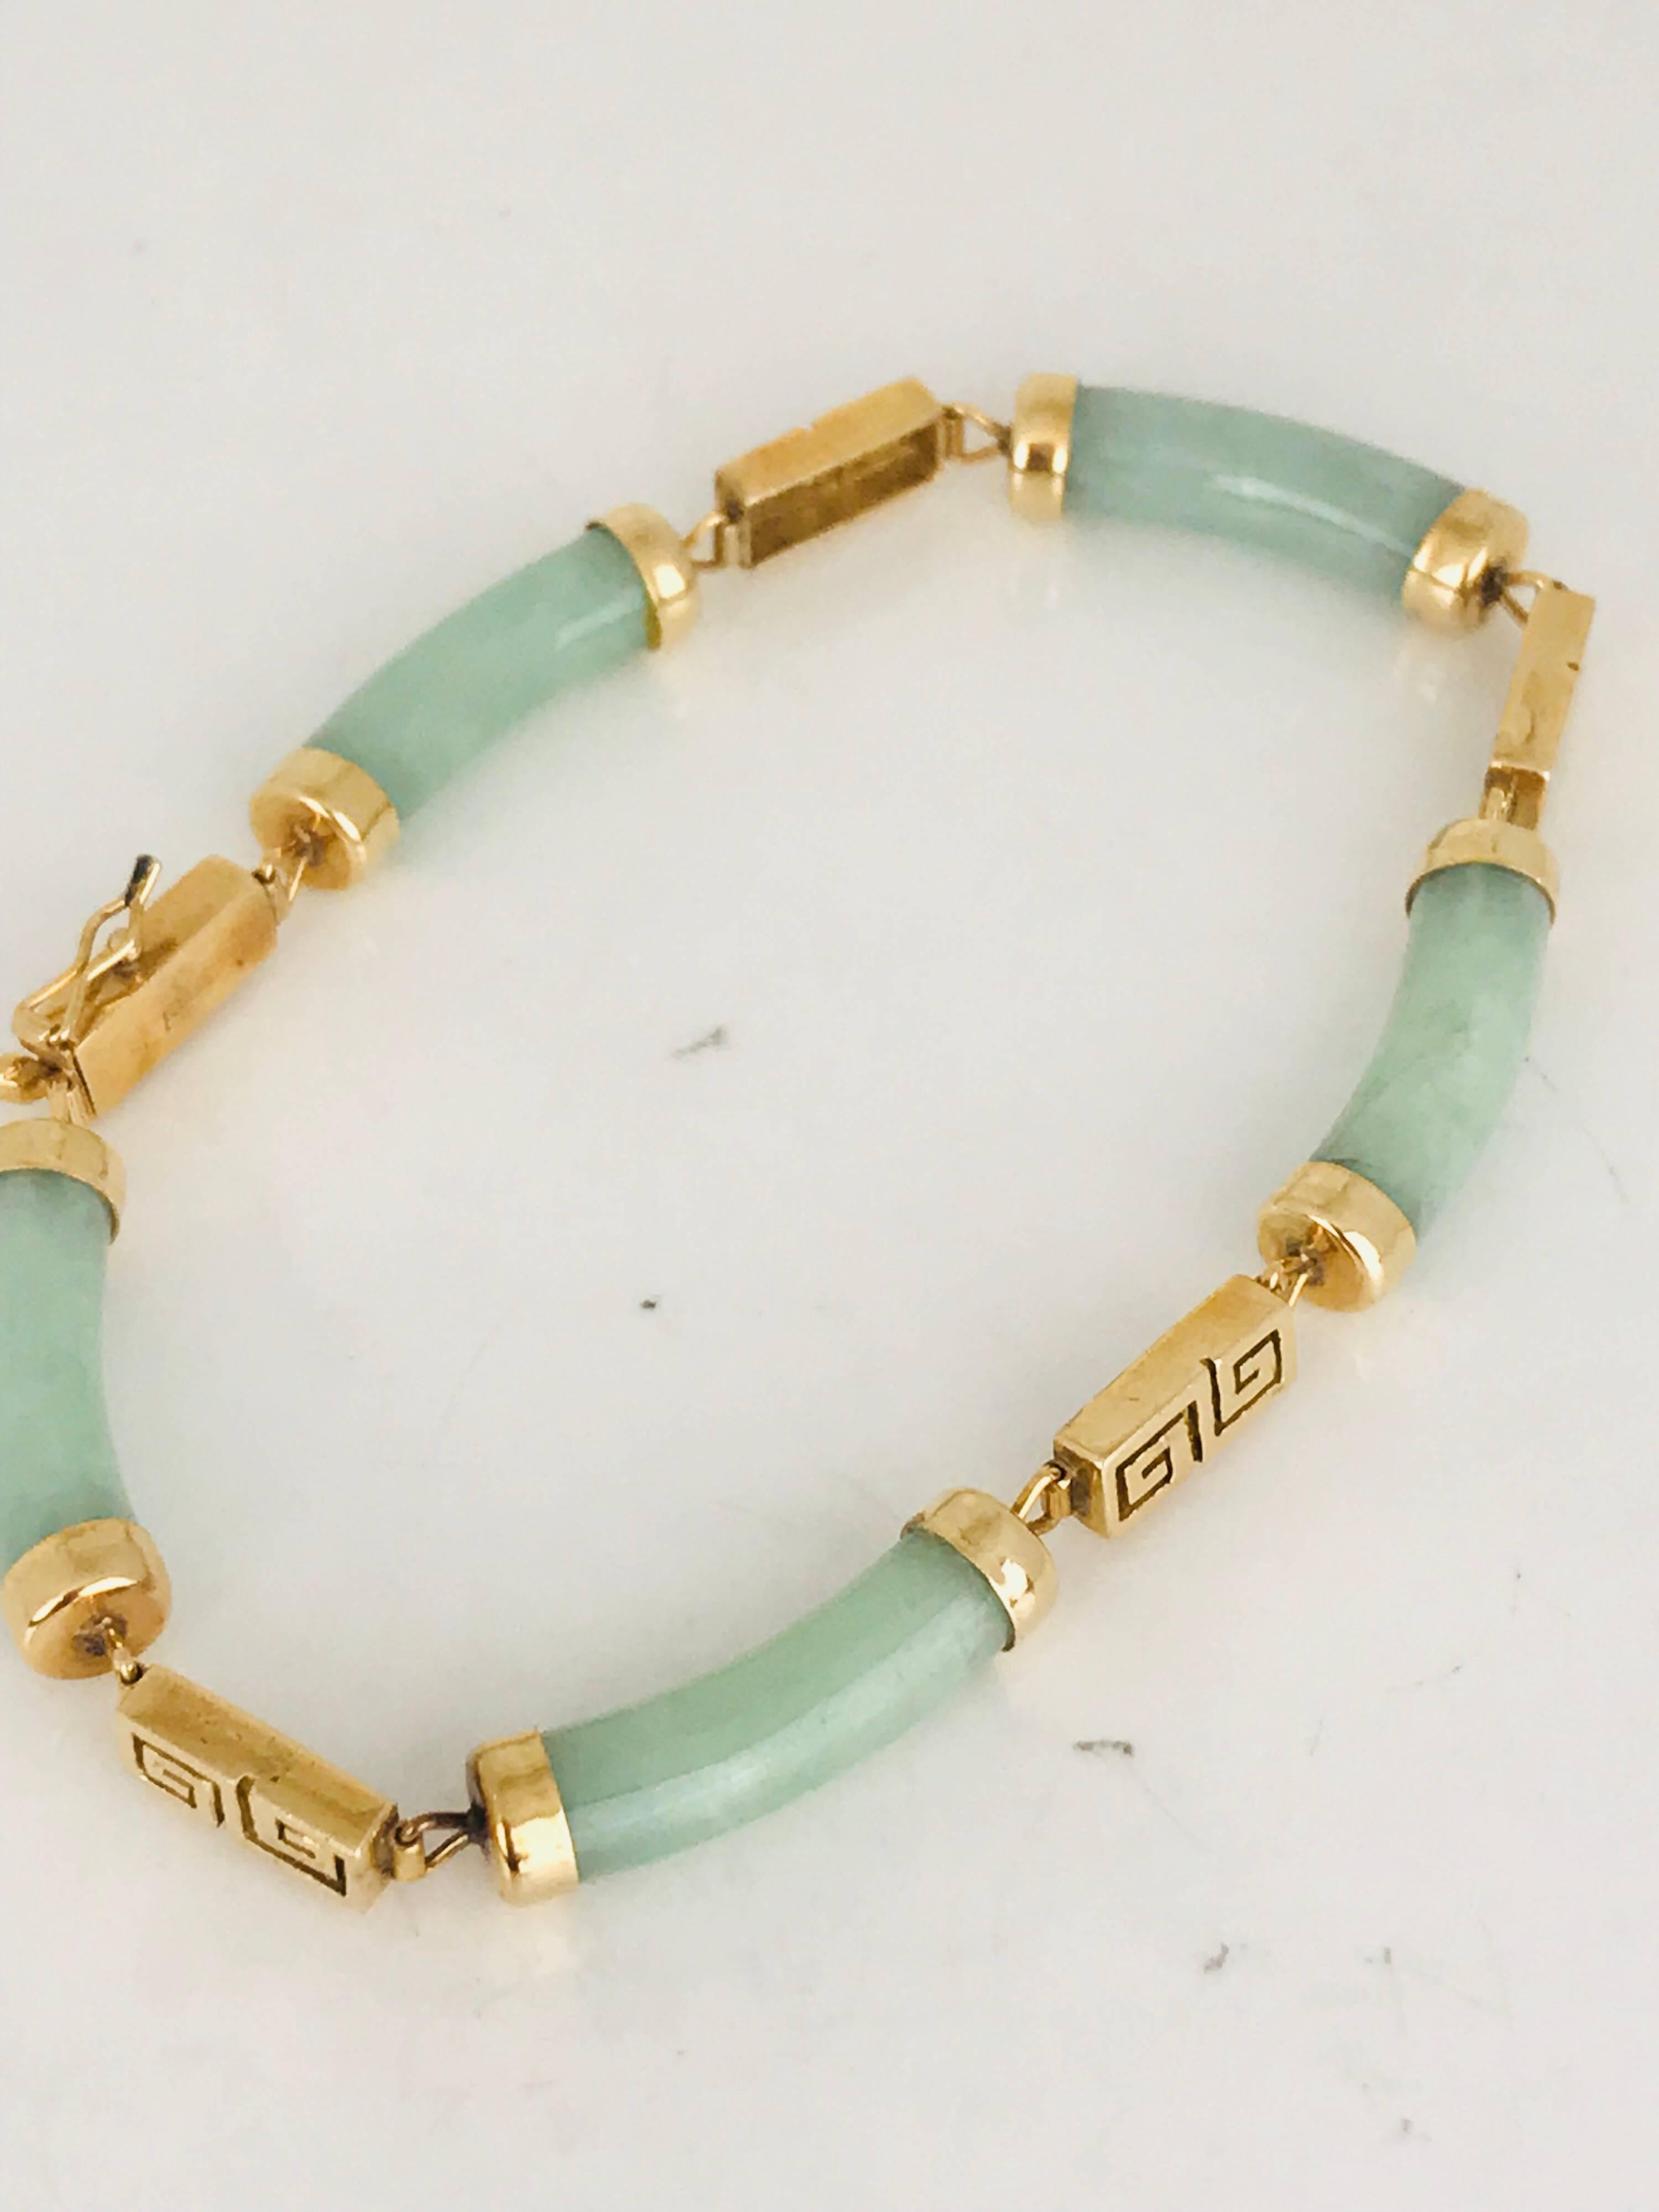 Green Jade, Greek Key Symbol, Yellow Gold Link Bracelet In Excellent Condition For Sale In Aliso Viejo, CA